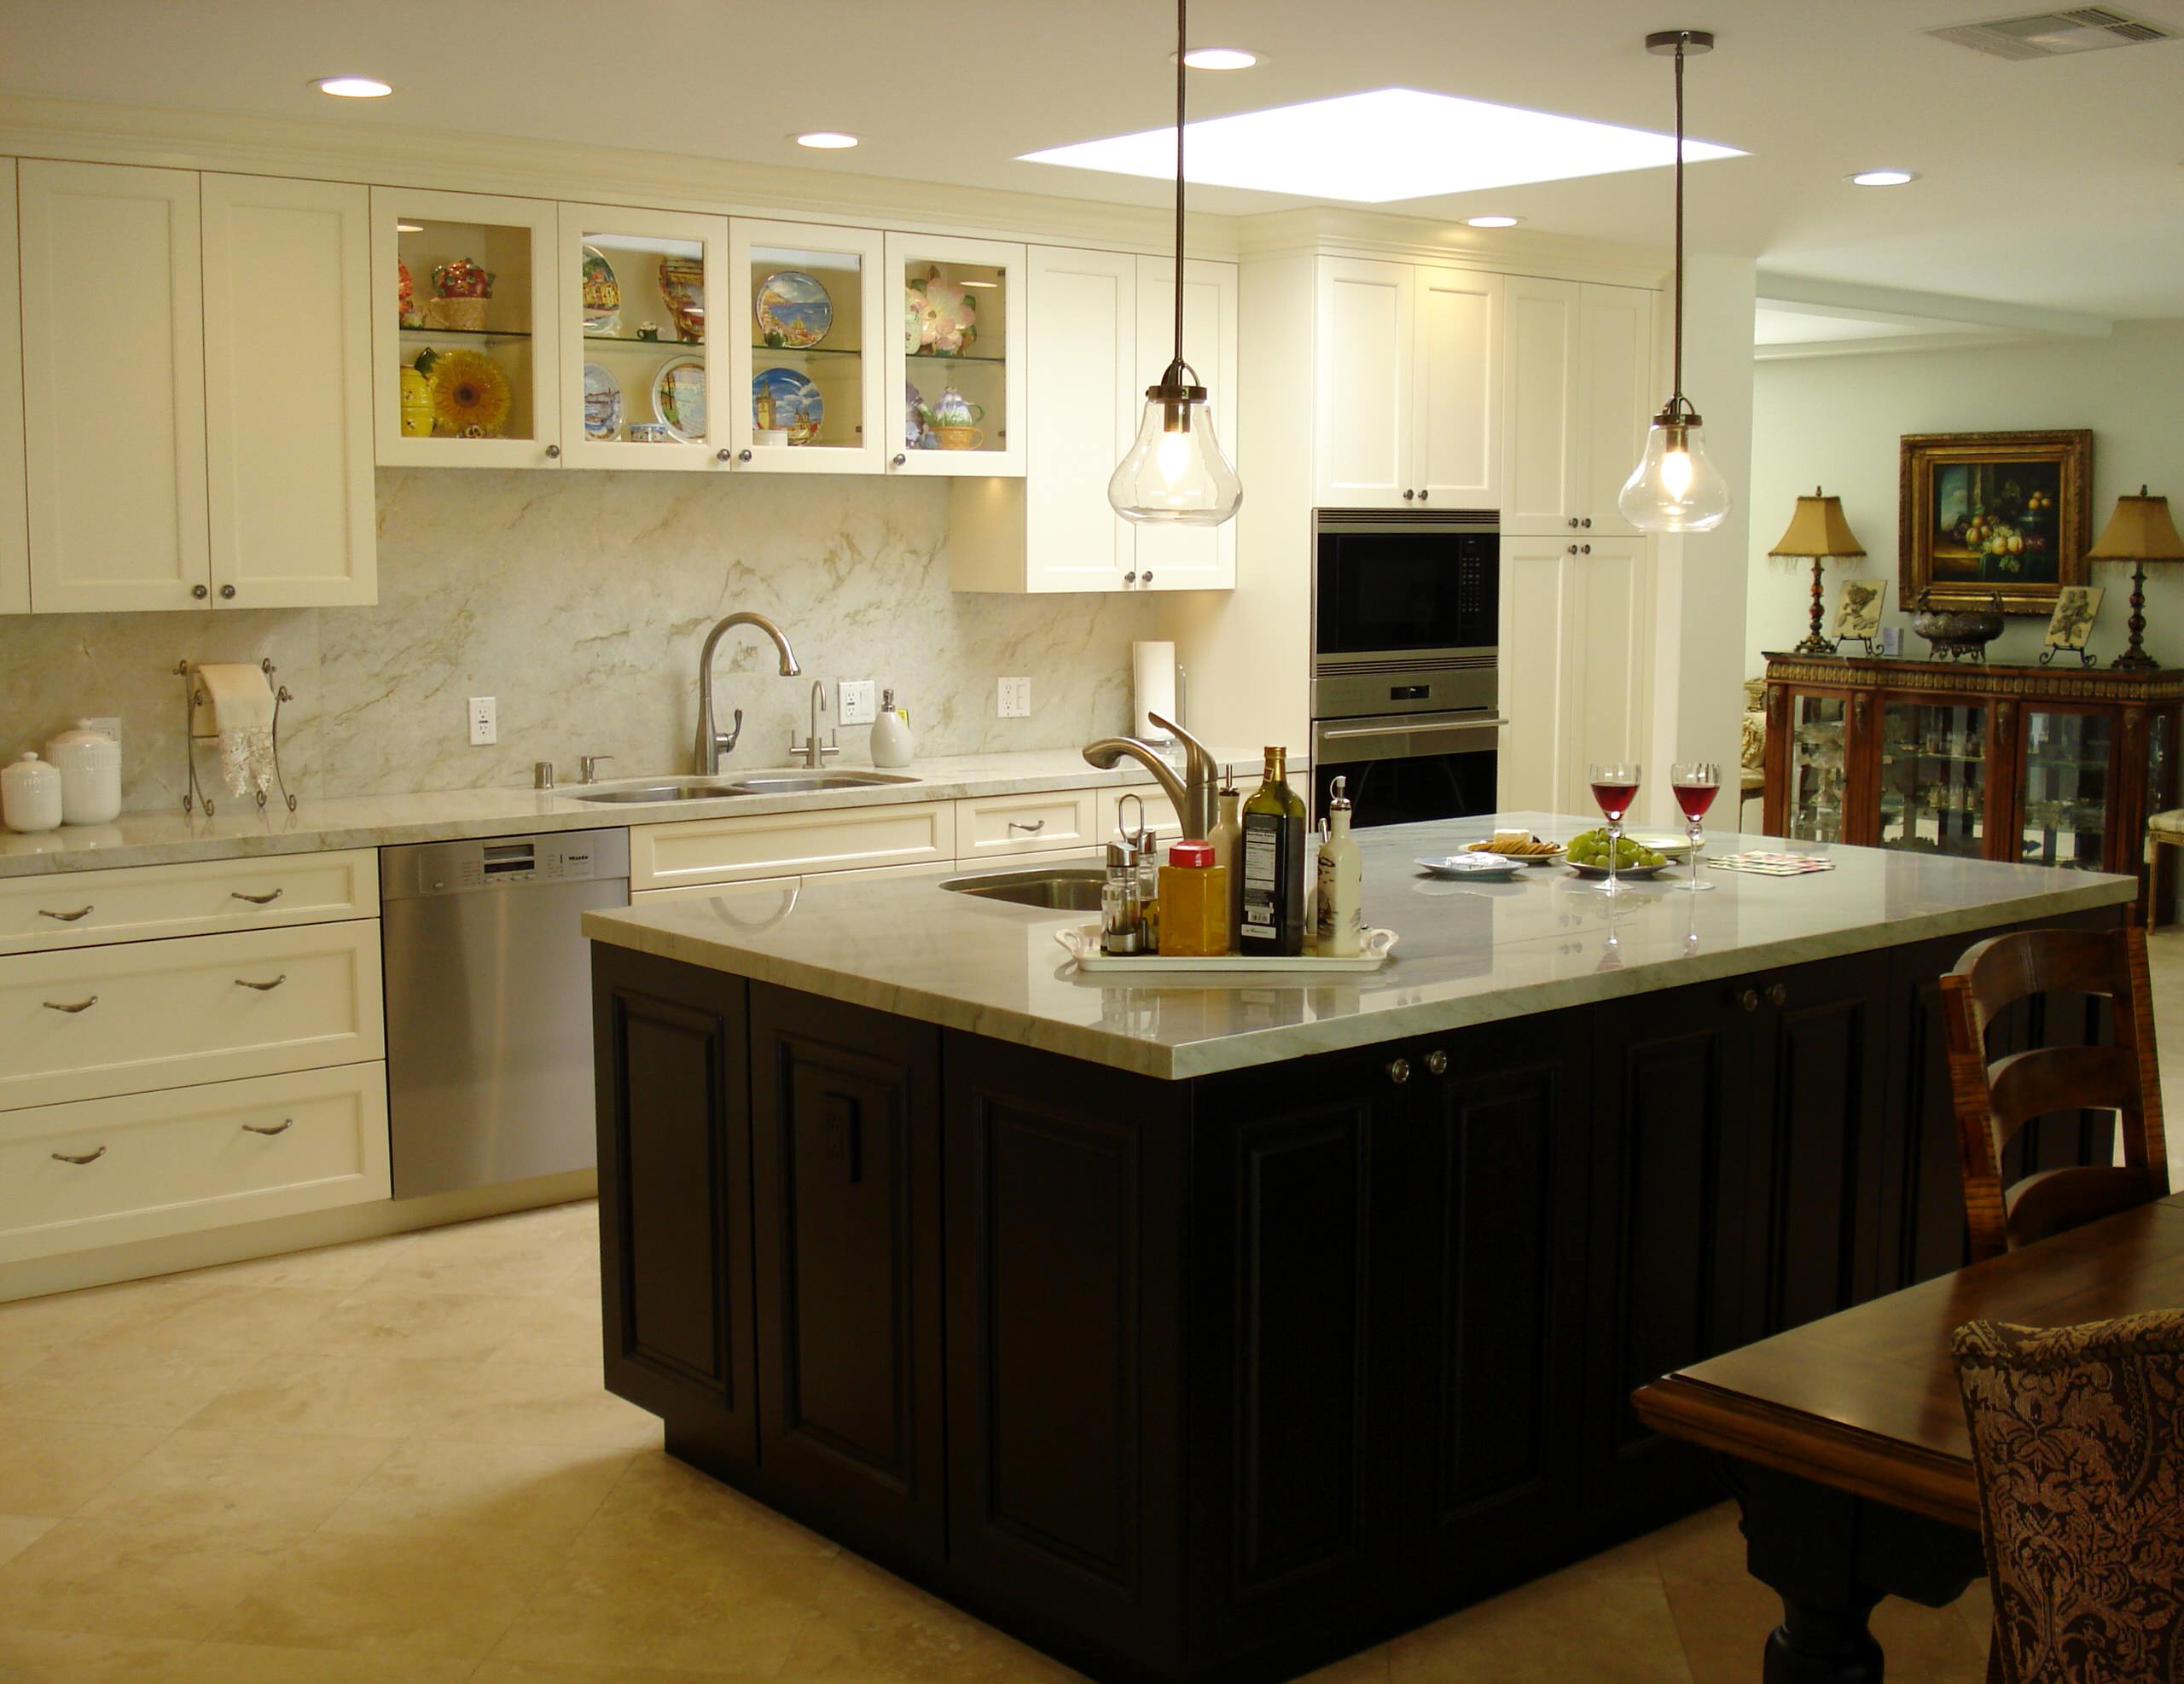 My Kitchen Remodel for a Bel Air, California Estate